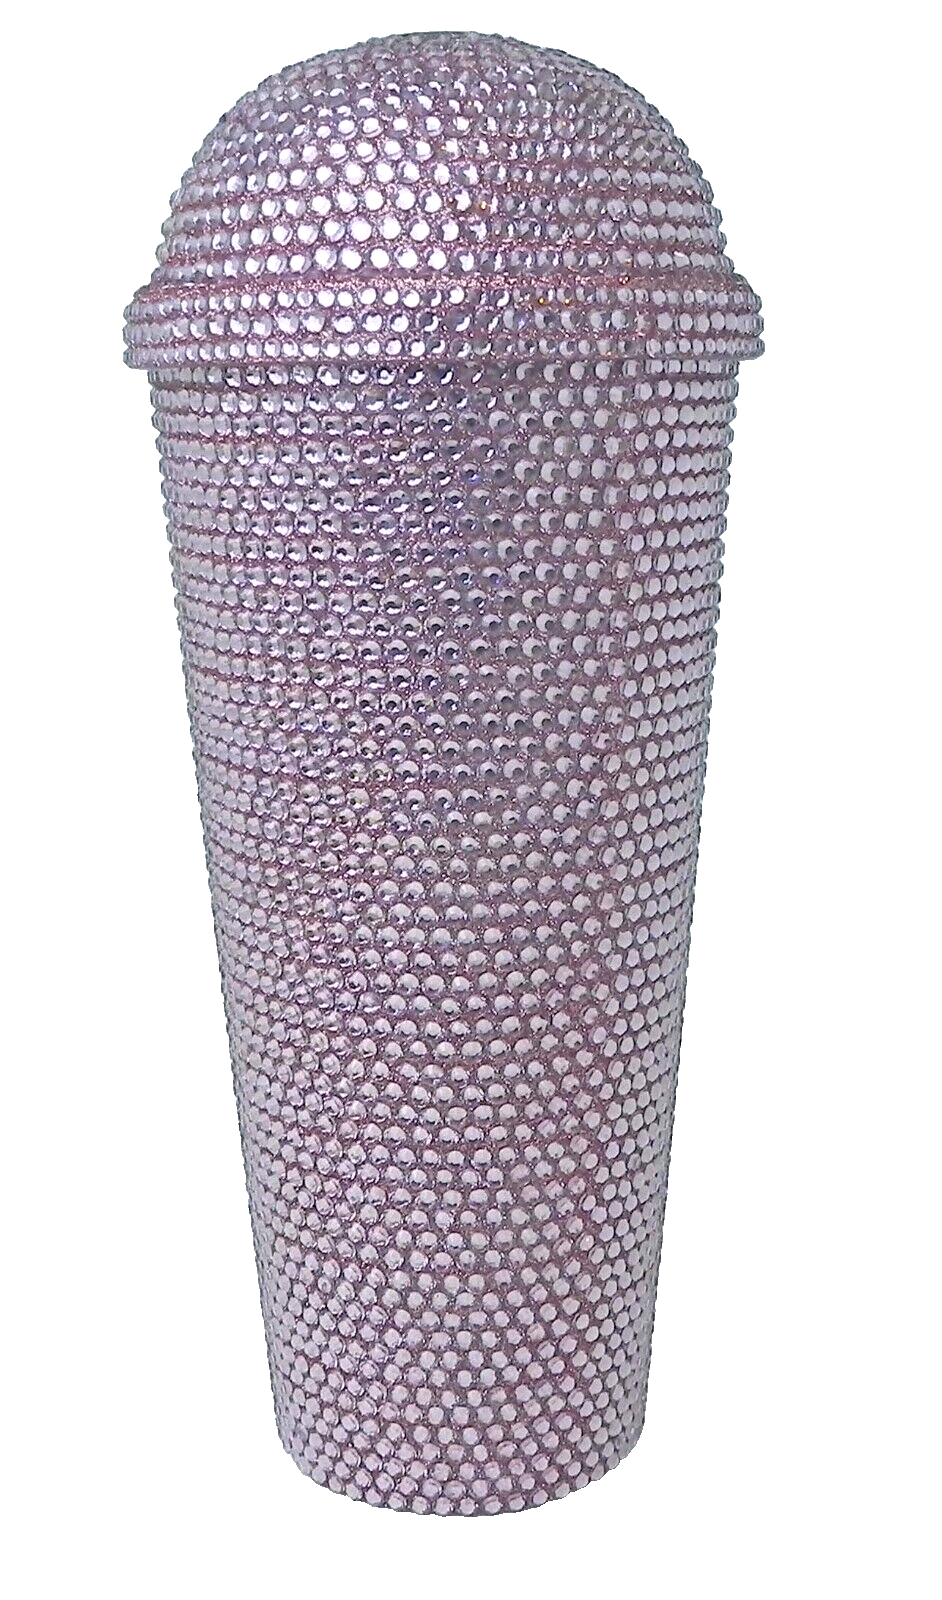 Light Pink Rhinestone Bling Water Bottle Cup with Lid - No Straw - 24 oz